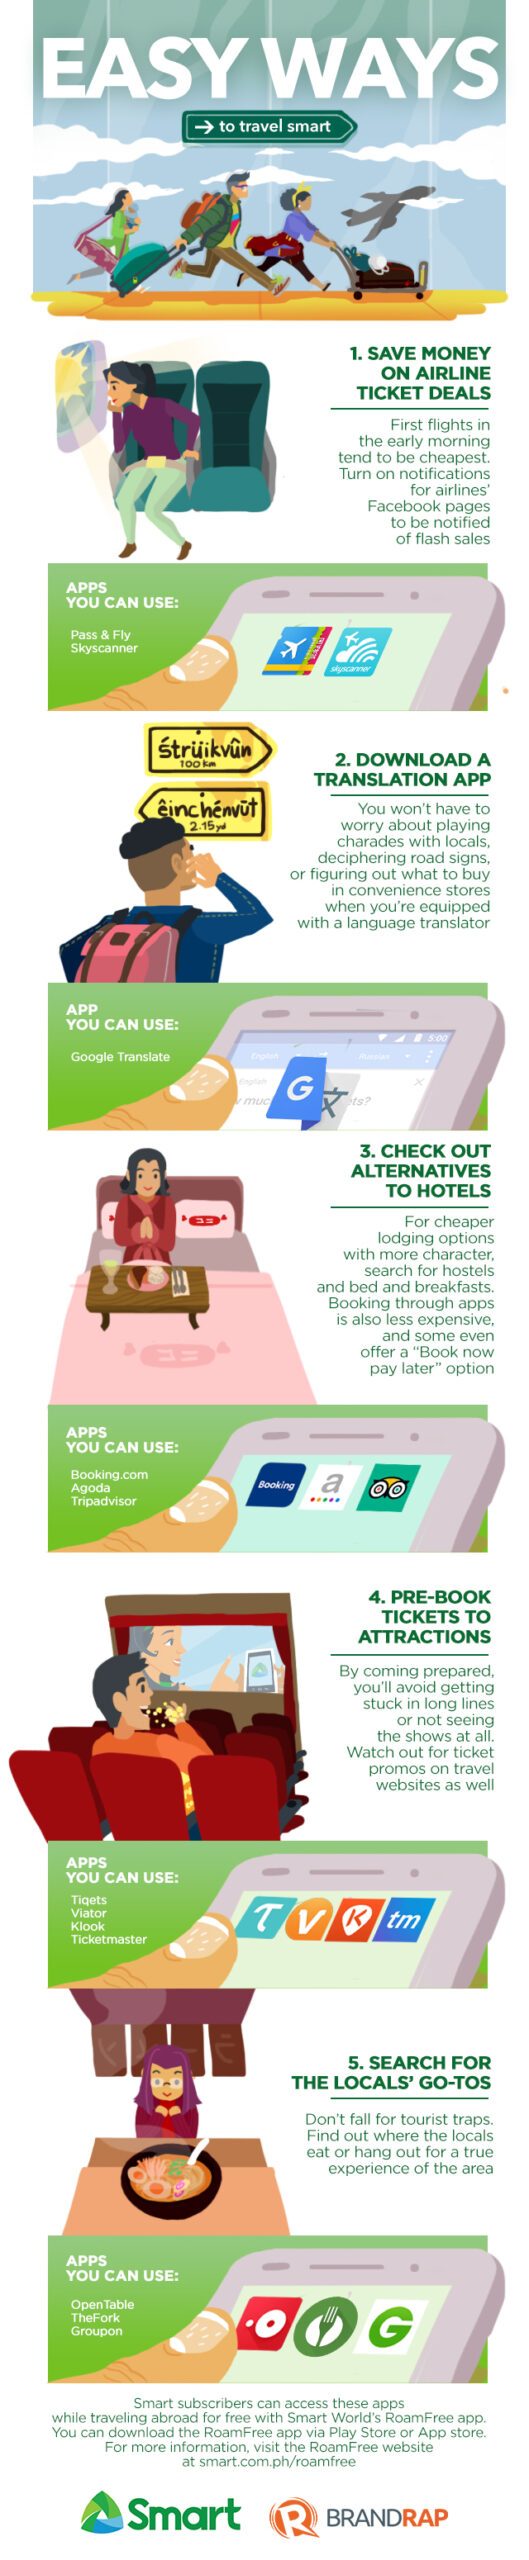 Infographic: Travel smarter with a little help from these apps